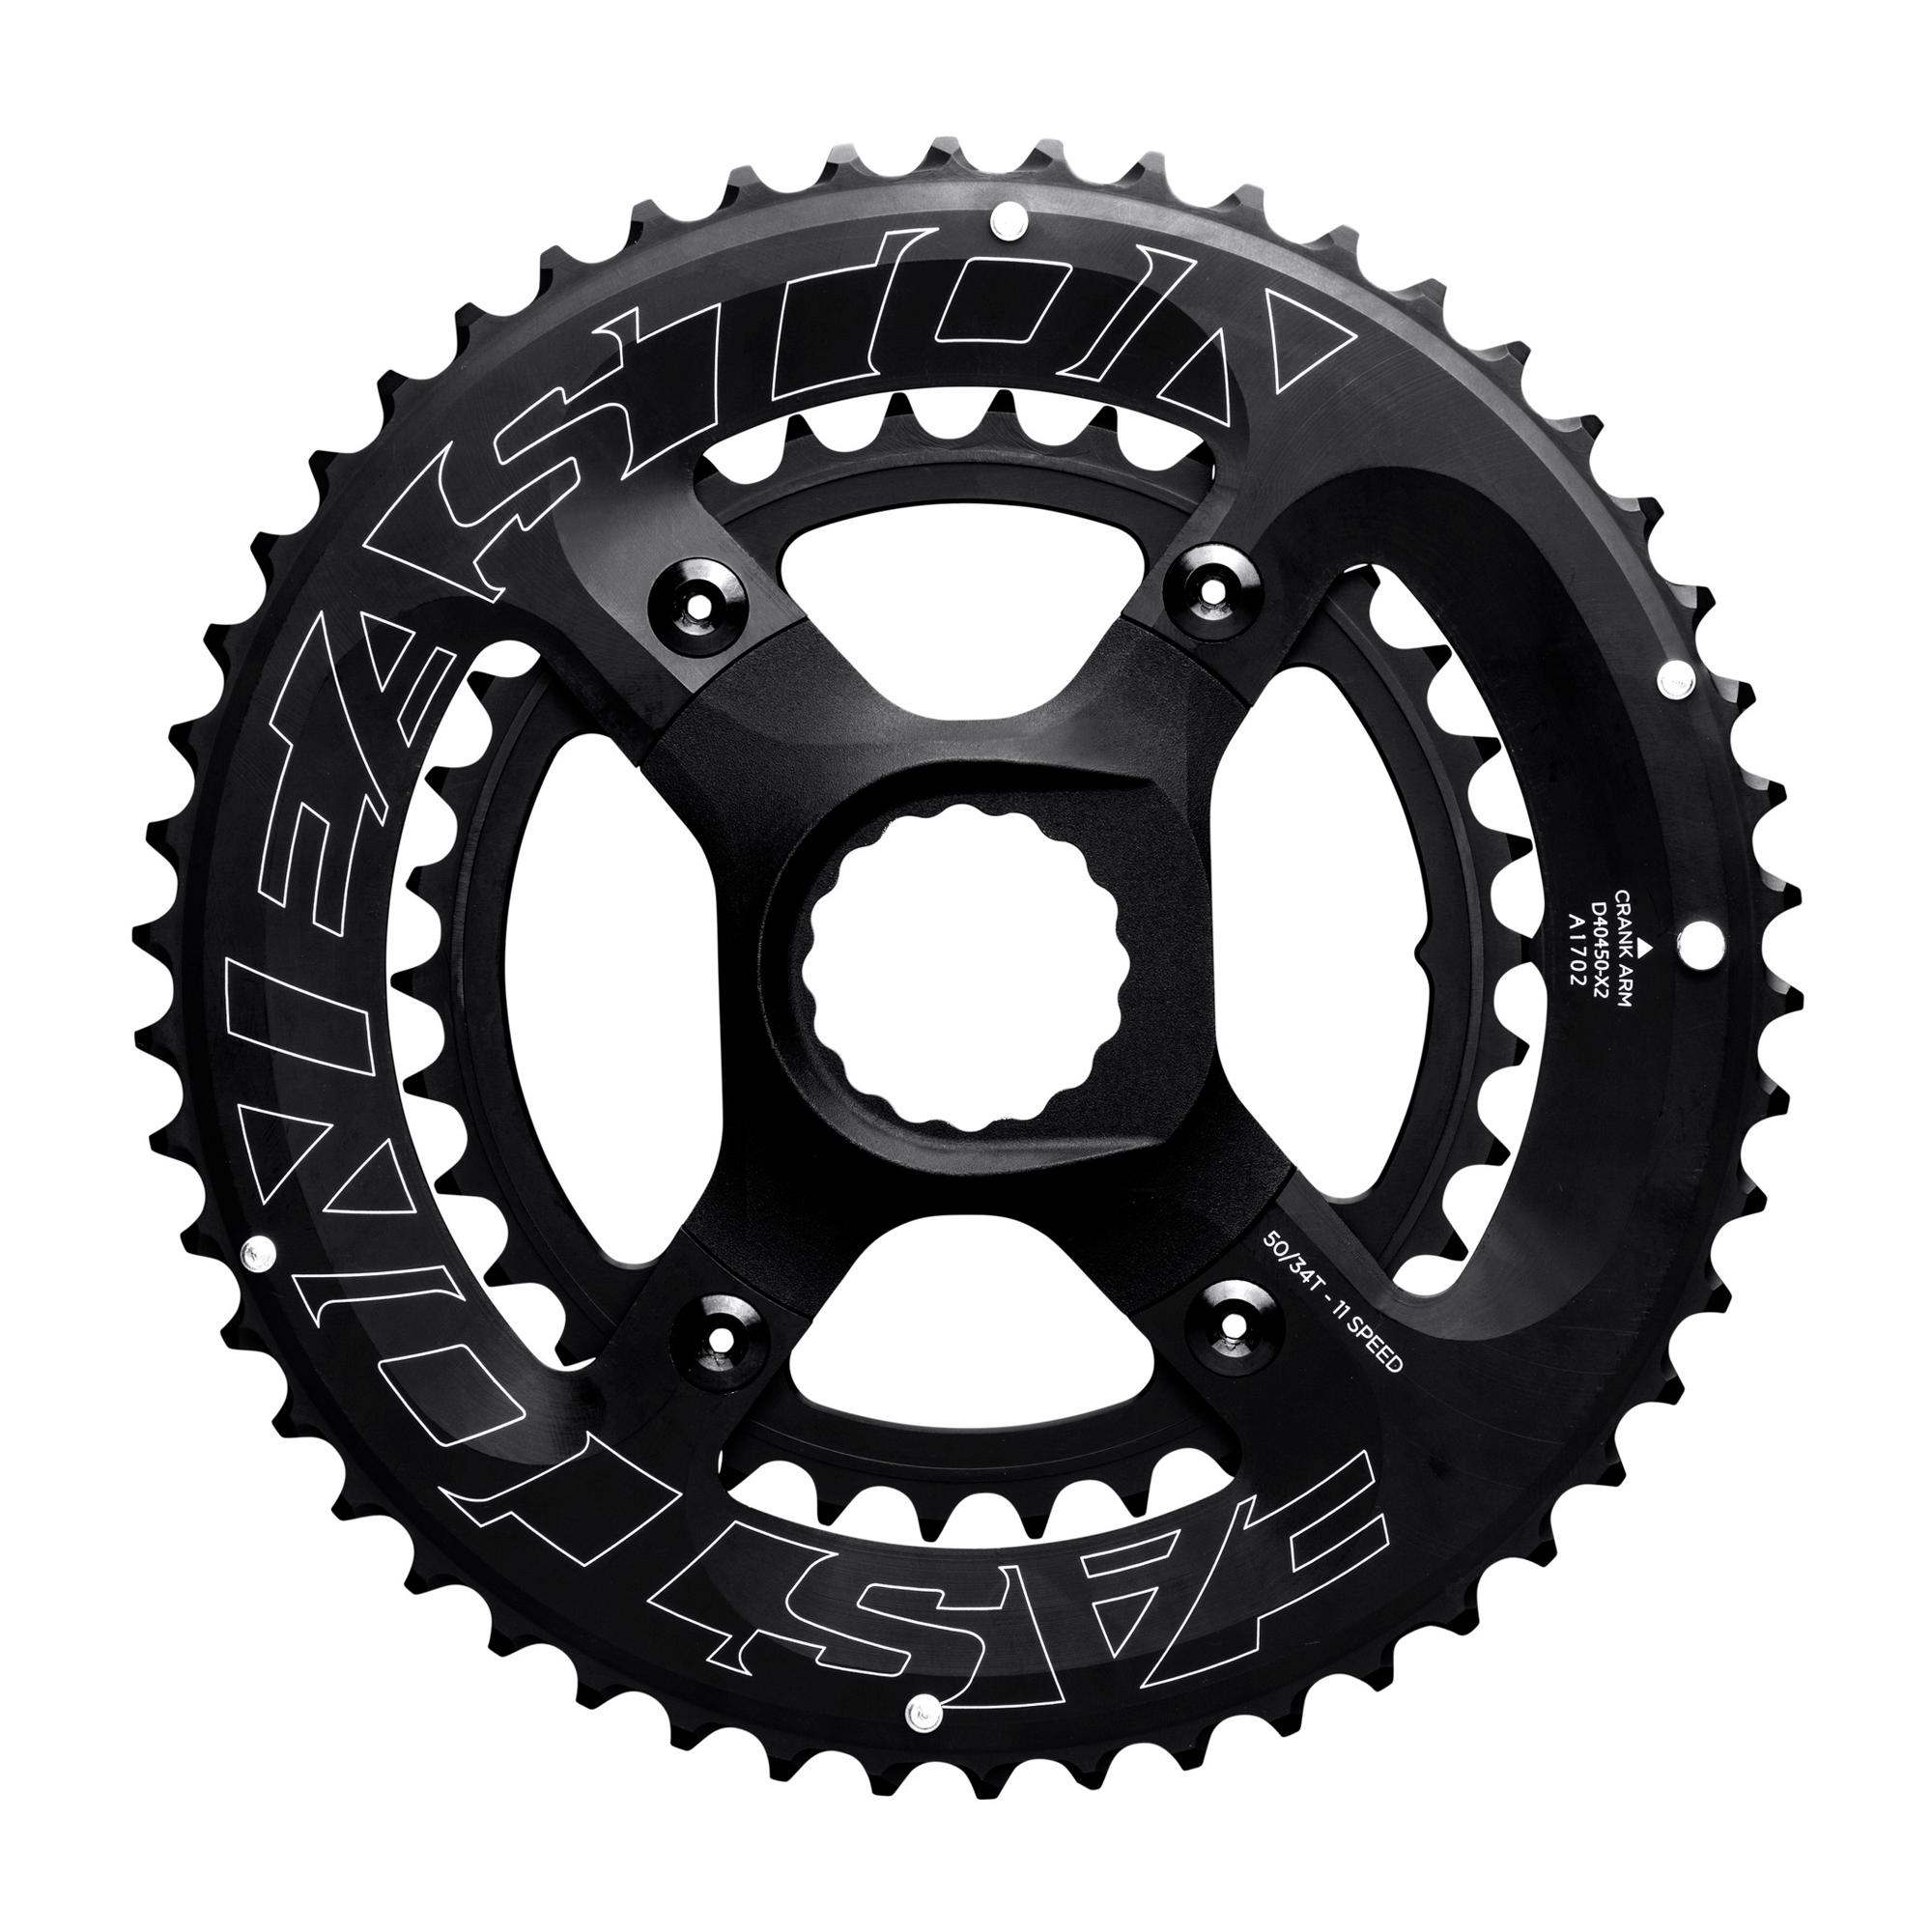 Easton 4-Bolt 11 Speed Shifting Chainring